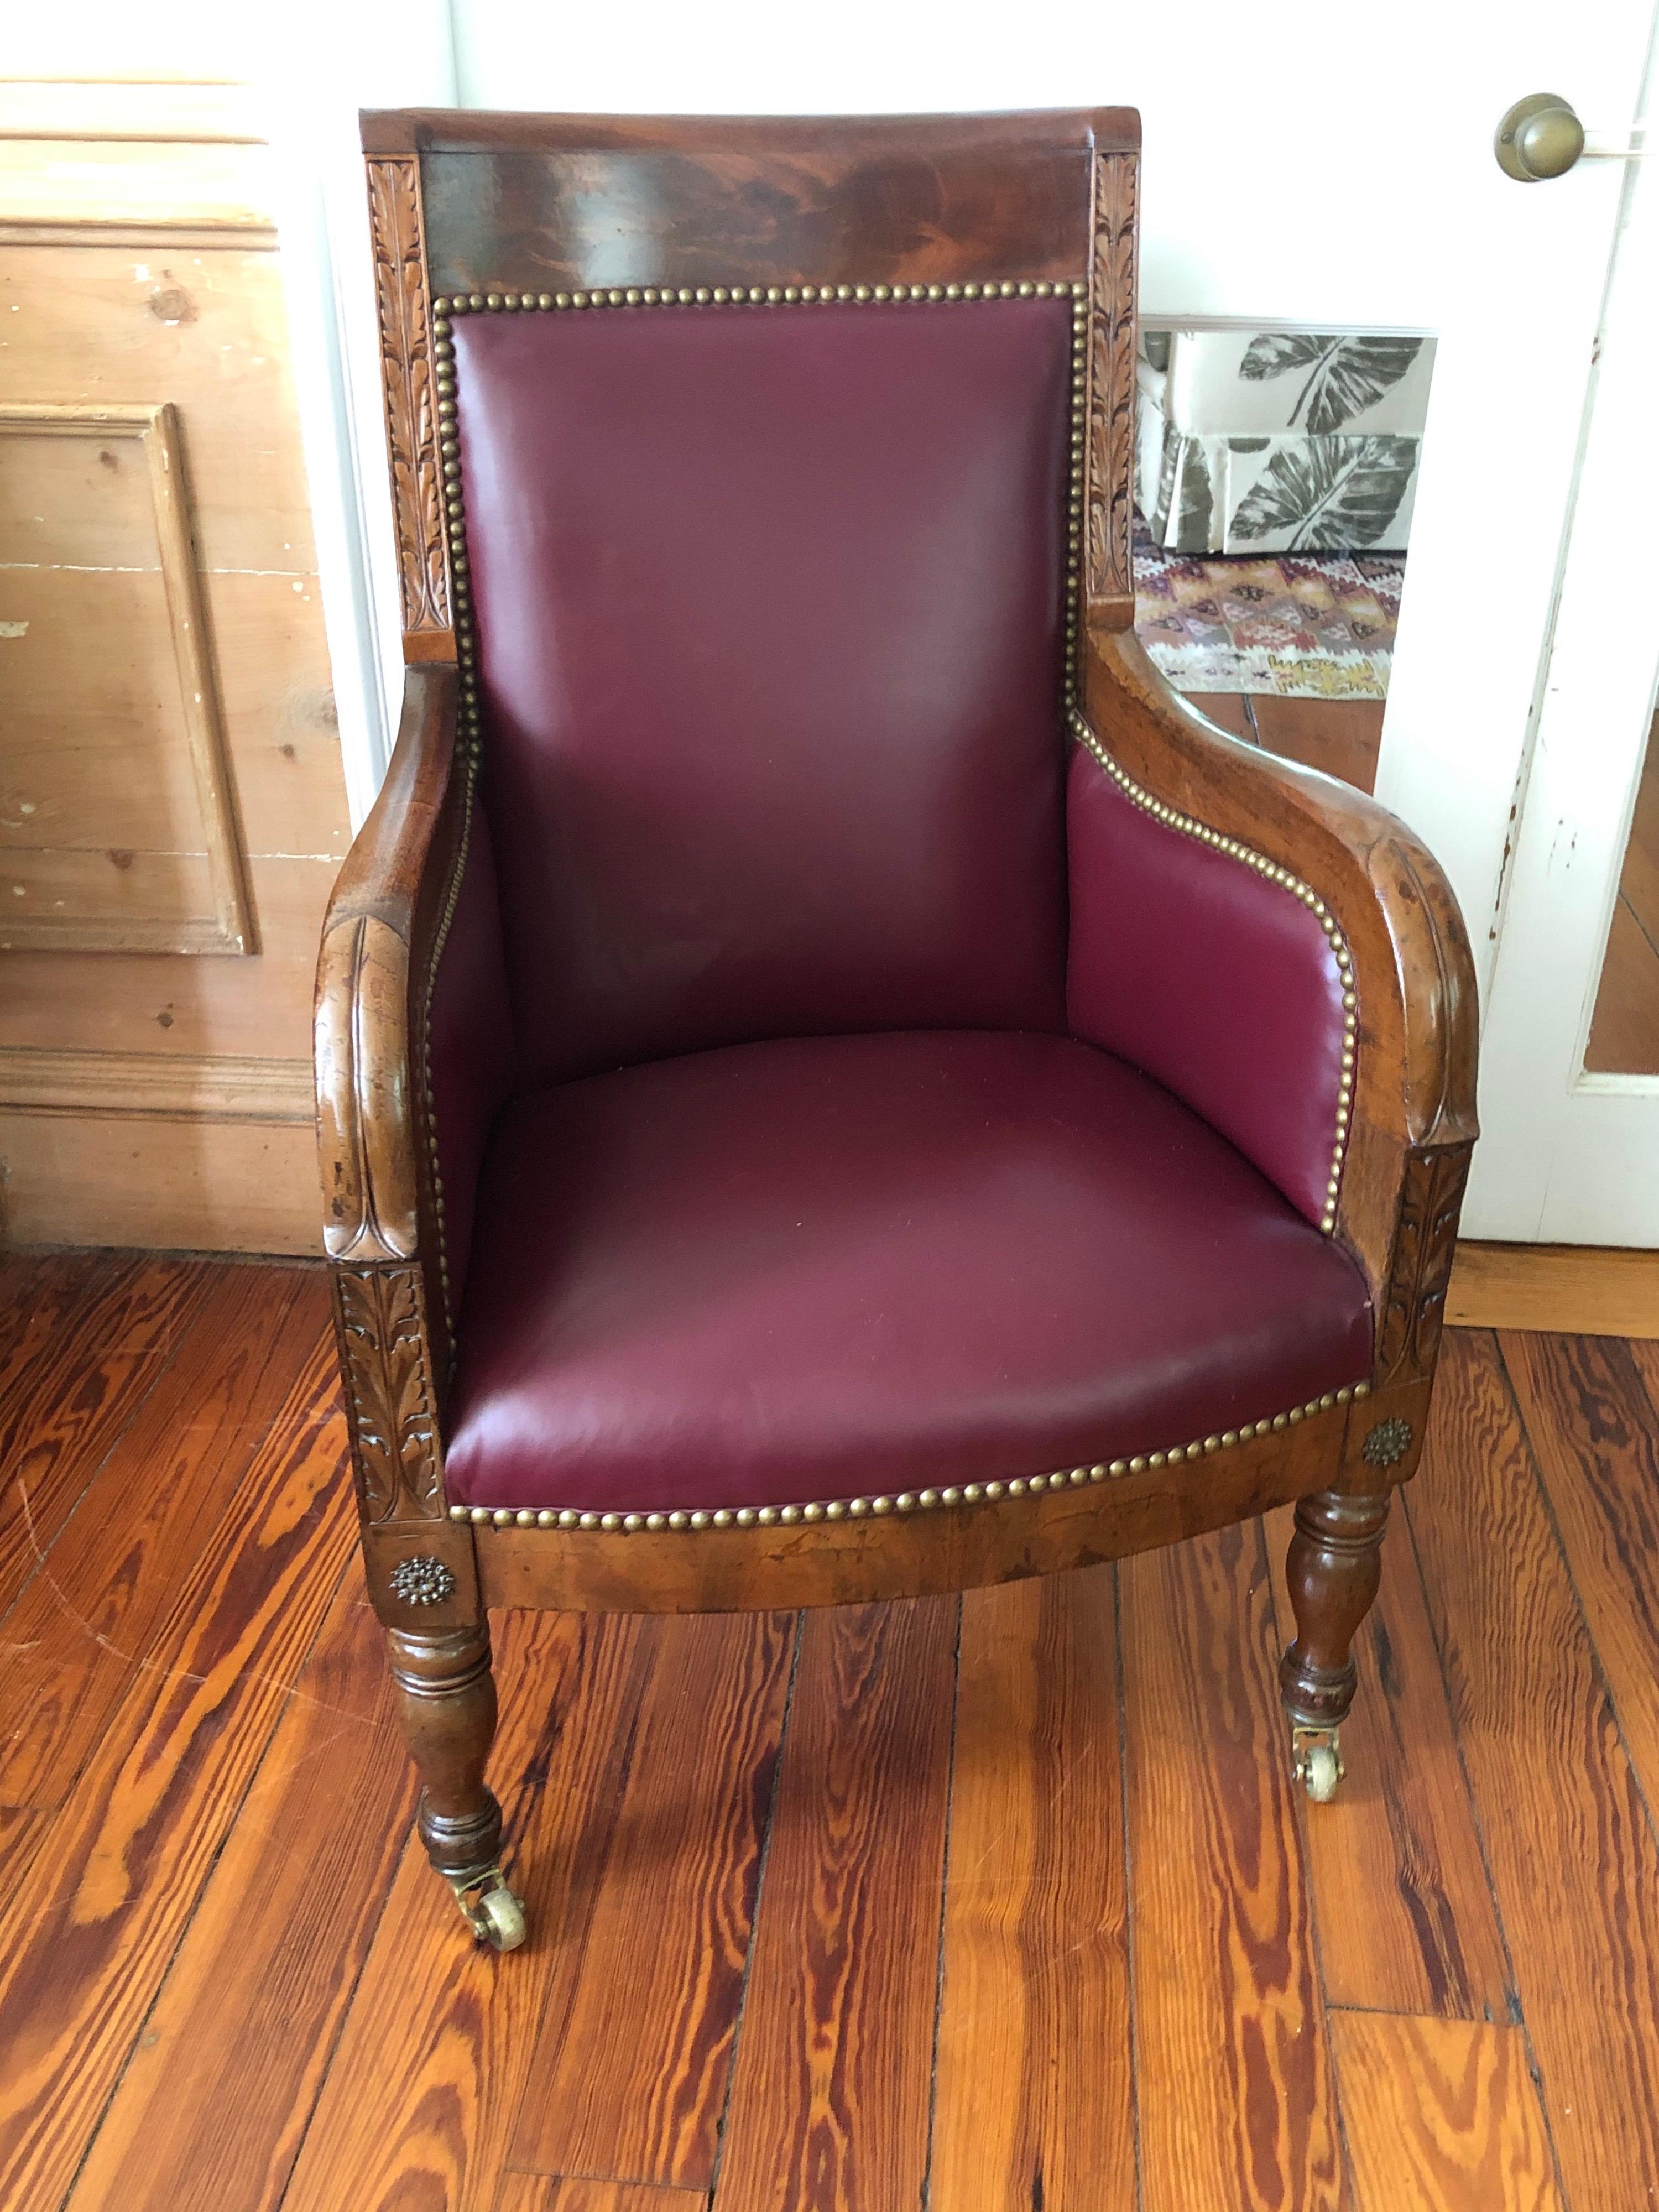 19th century Empire mahogany chair on brass casters. Upholstered in dark red
leatherette and finished with brass upholstery tacks.